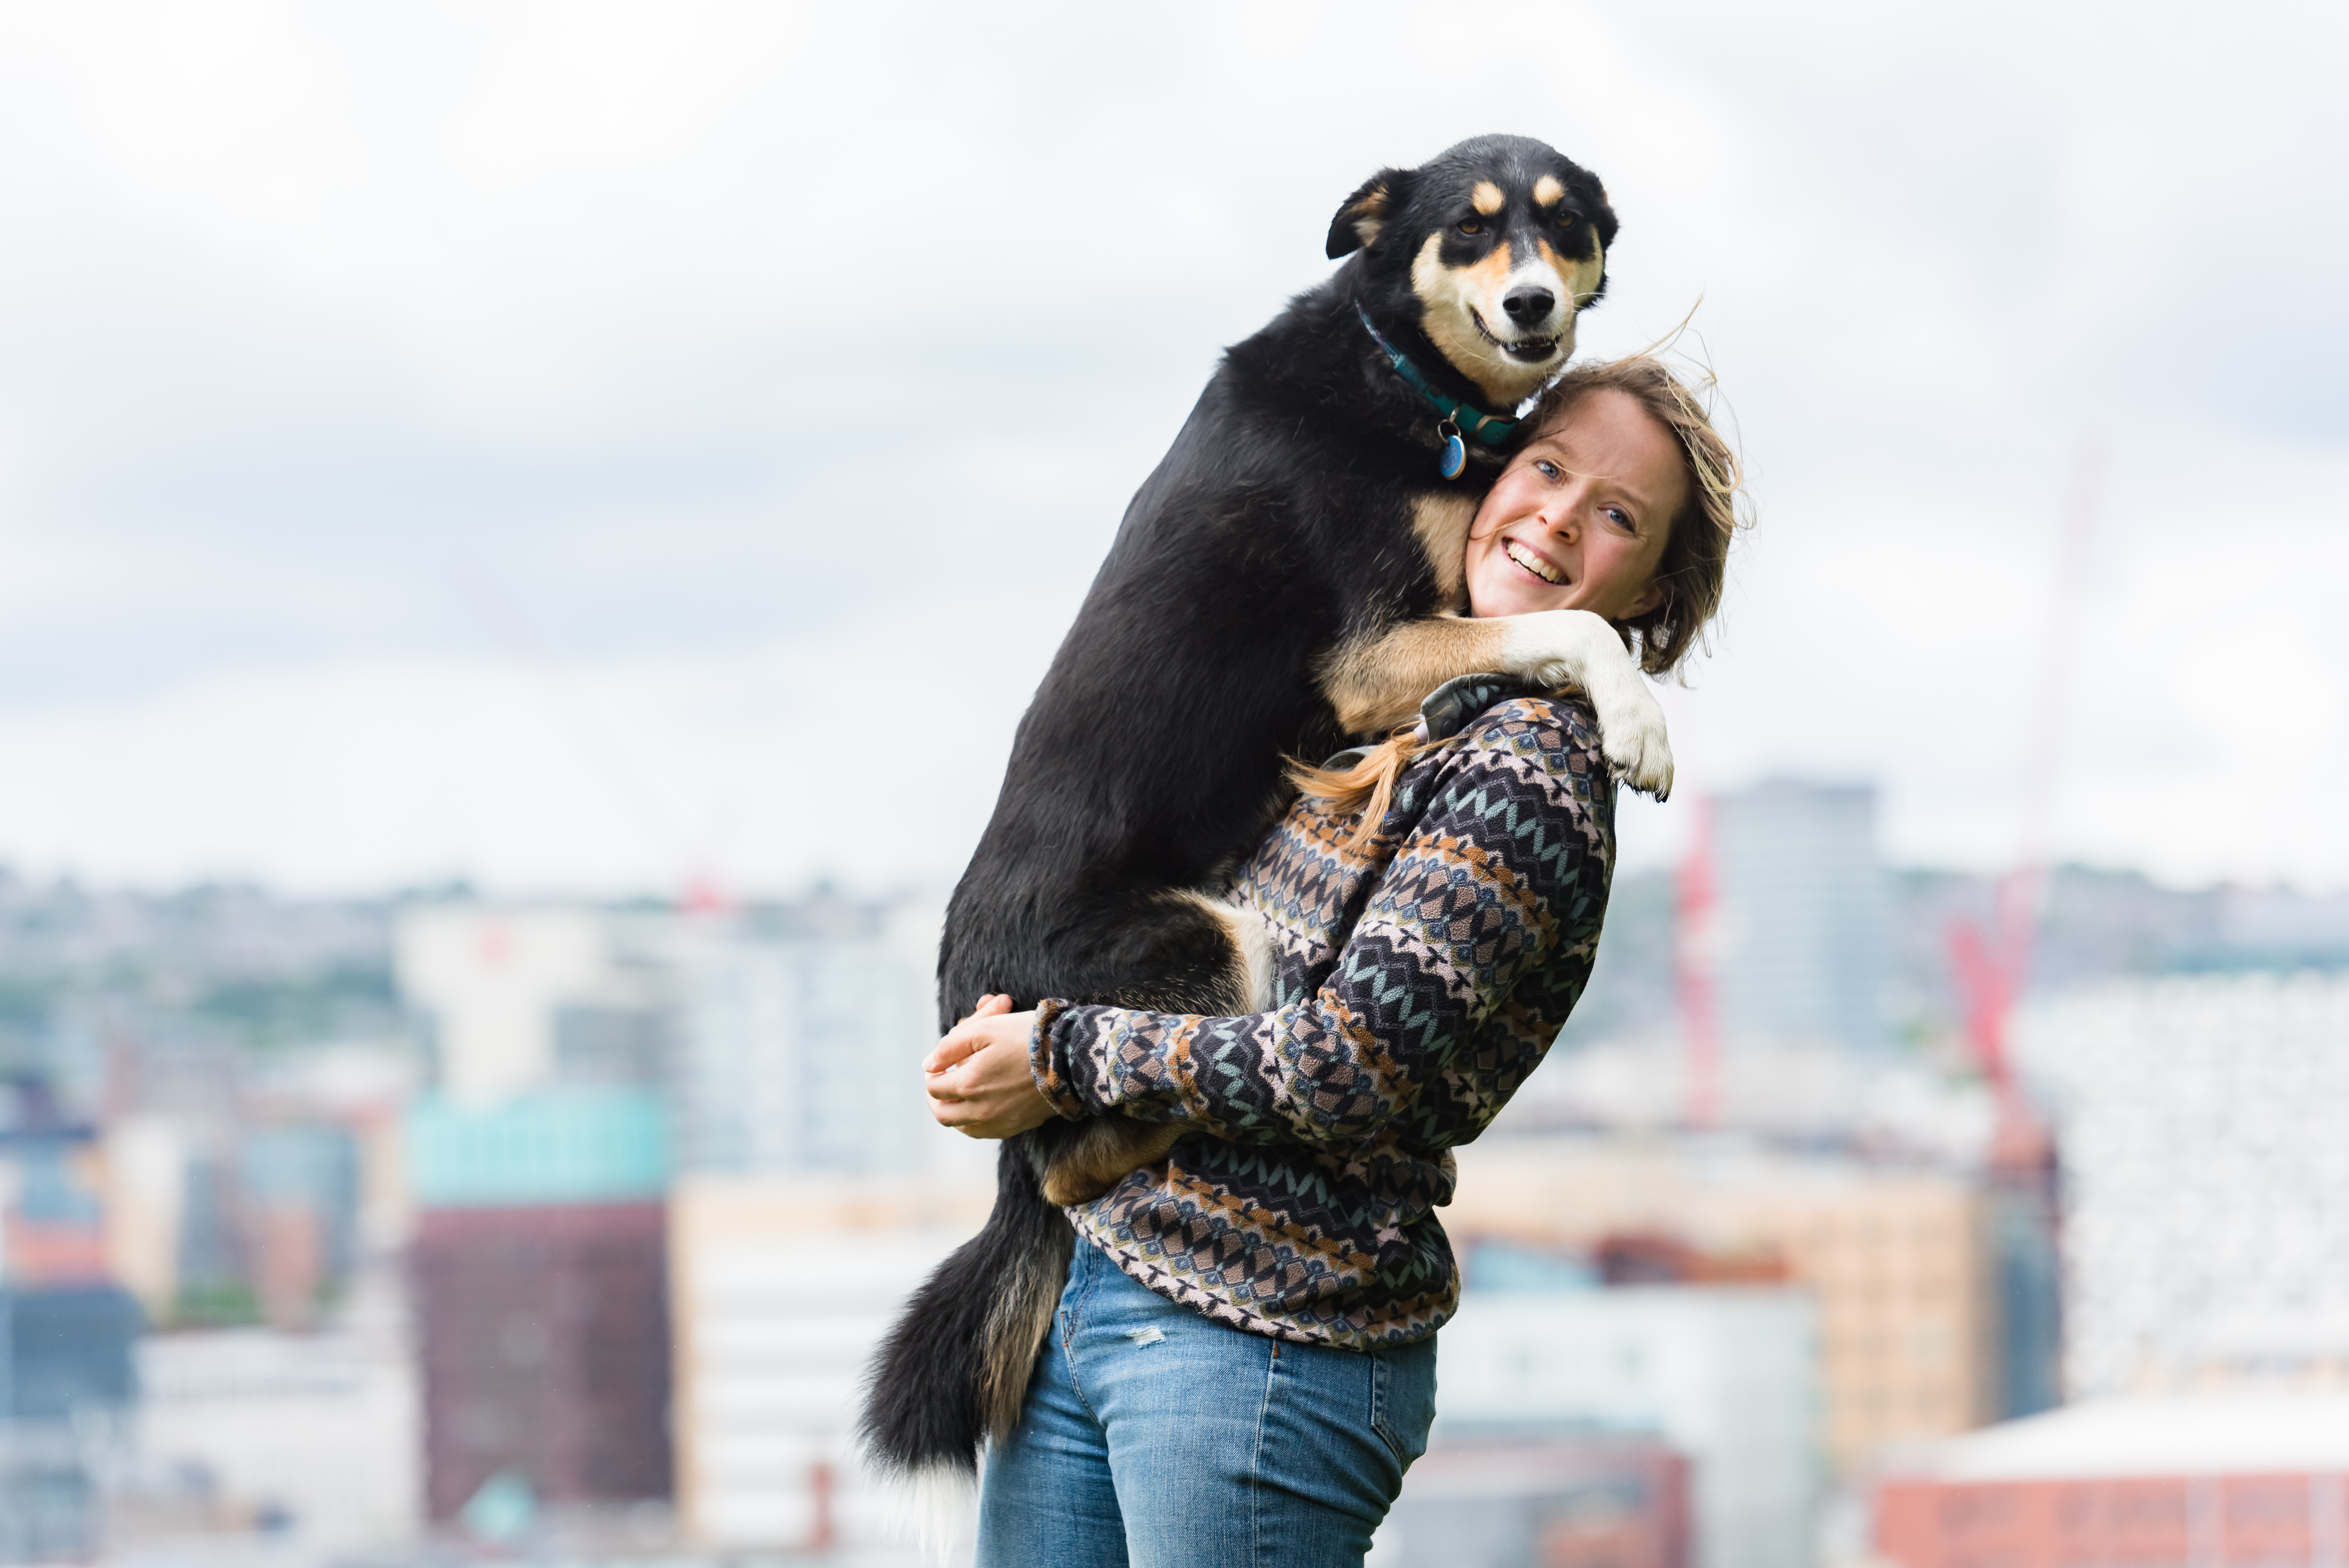 A woman lifts her dog up in a hug with the cityscape in the background